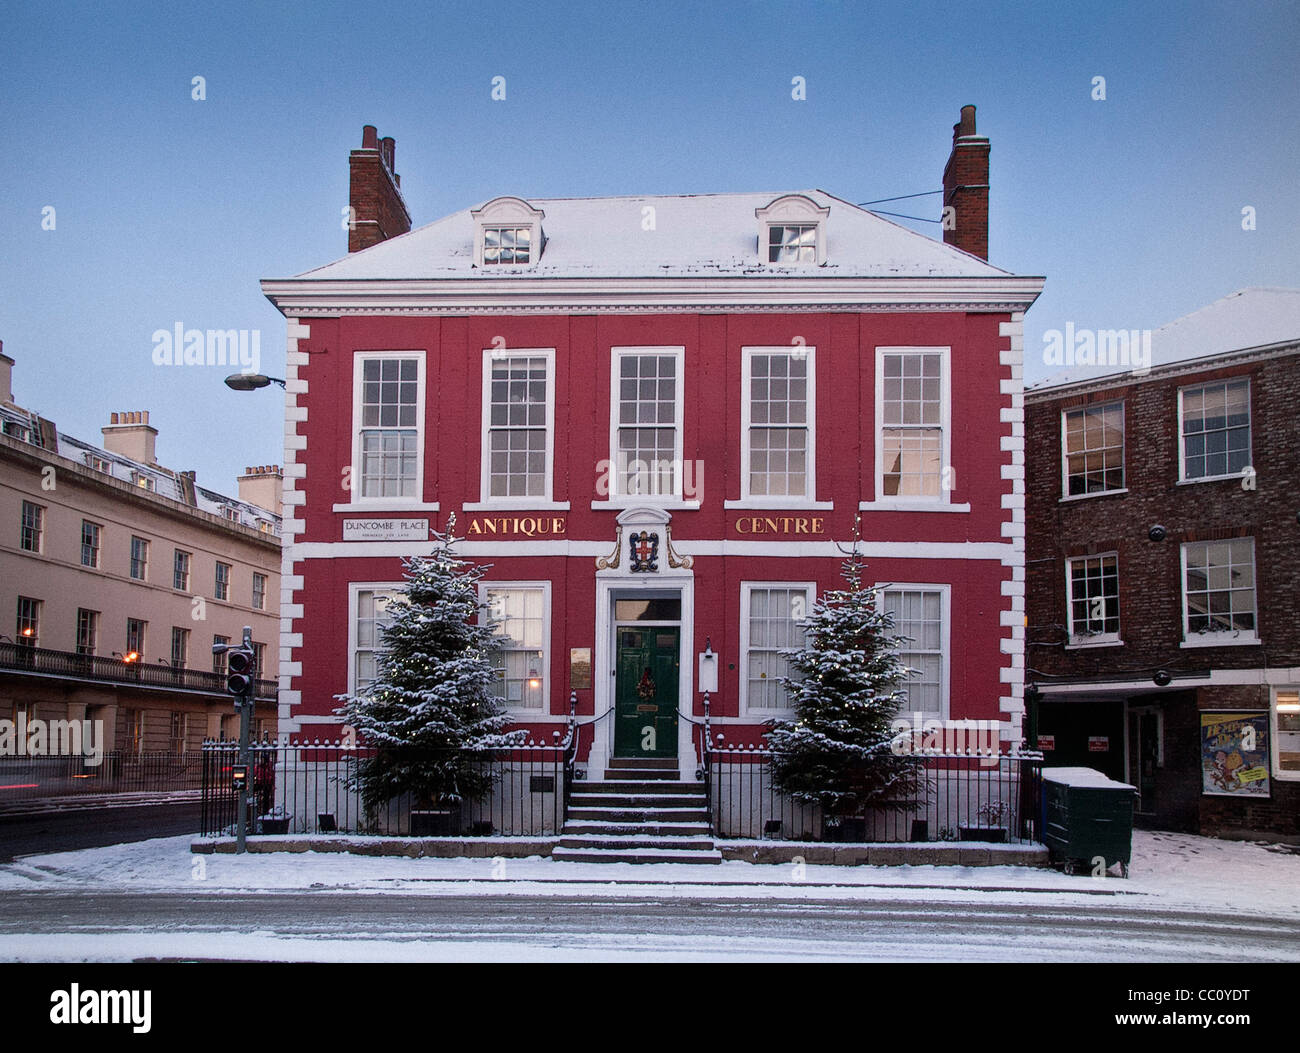 Red House Antique centre in snow with Christmas trees Stock Photo